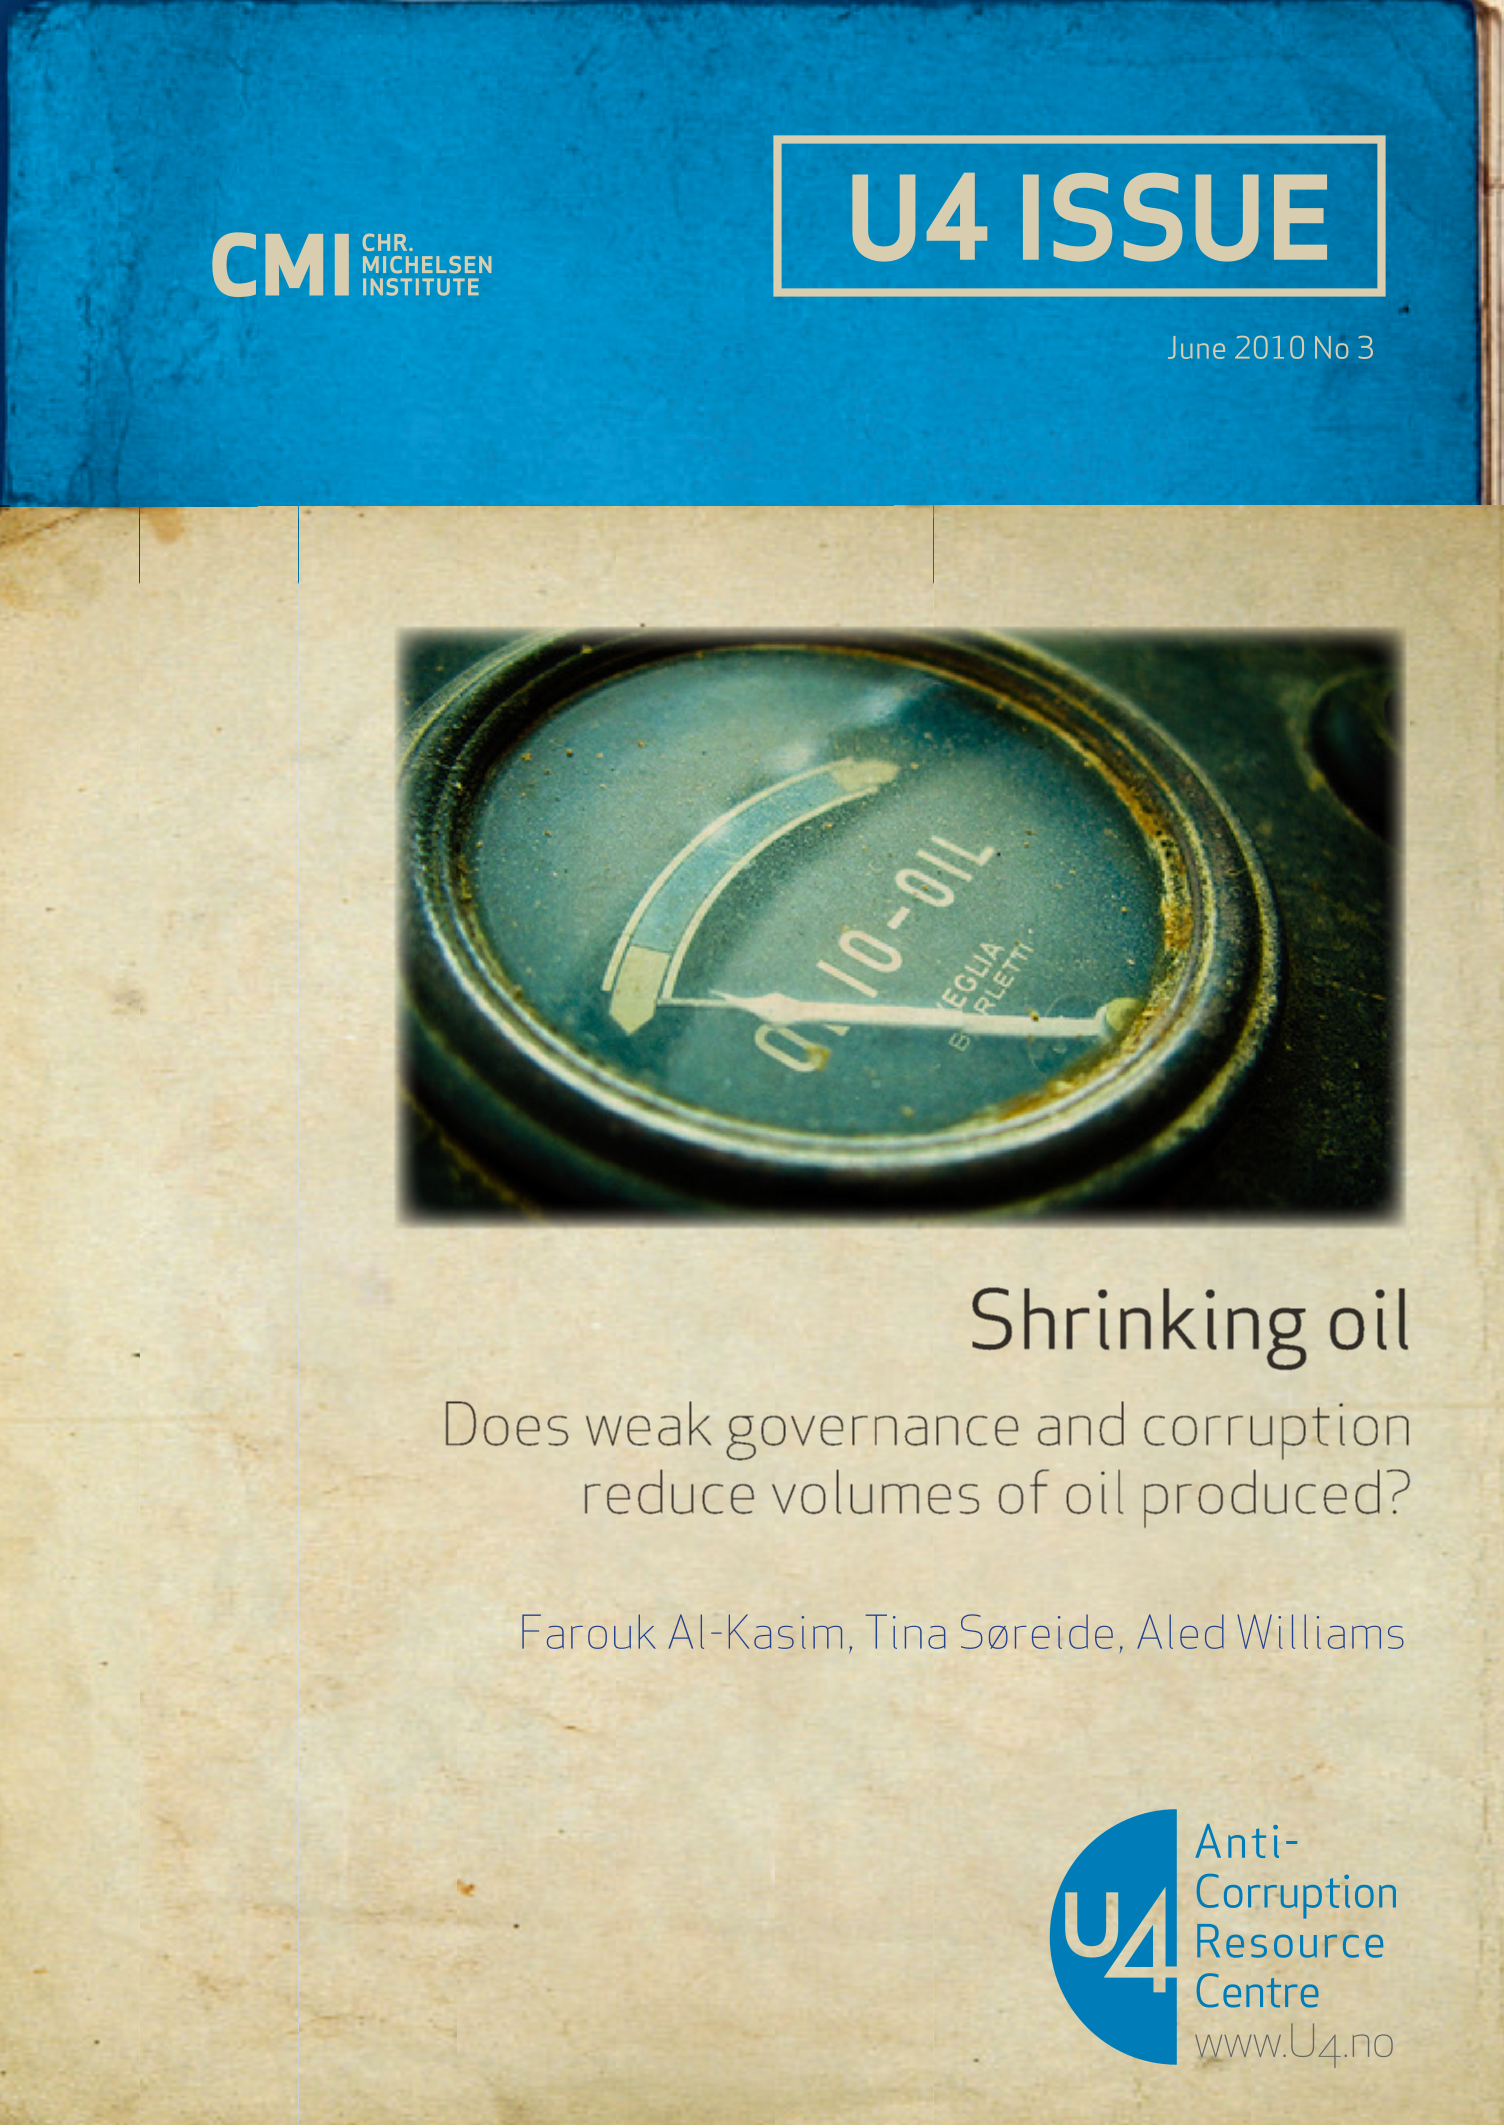 Shrinking oil: Does weak governance and corruption reduce volumes of oil produced?